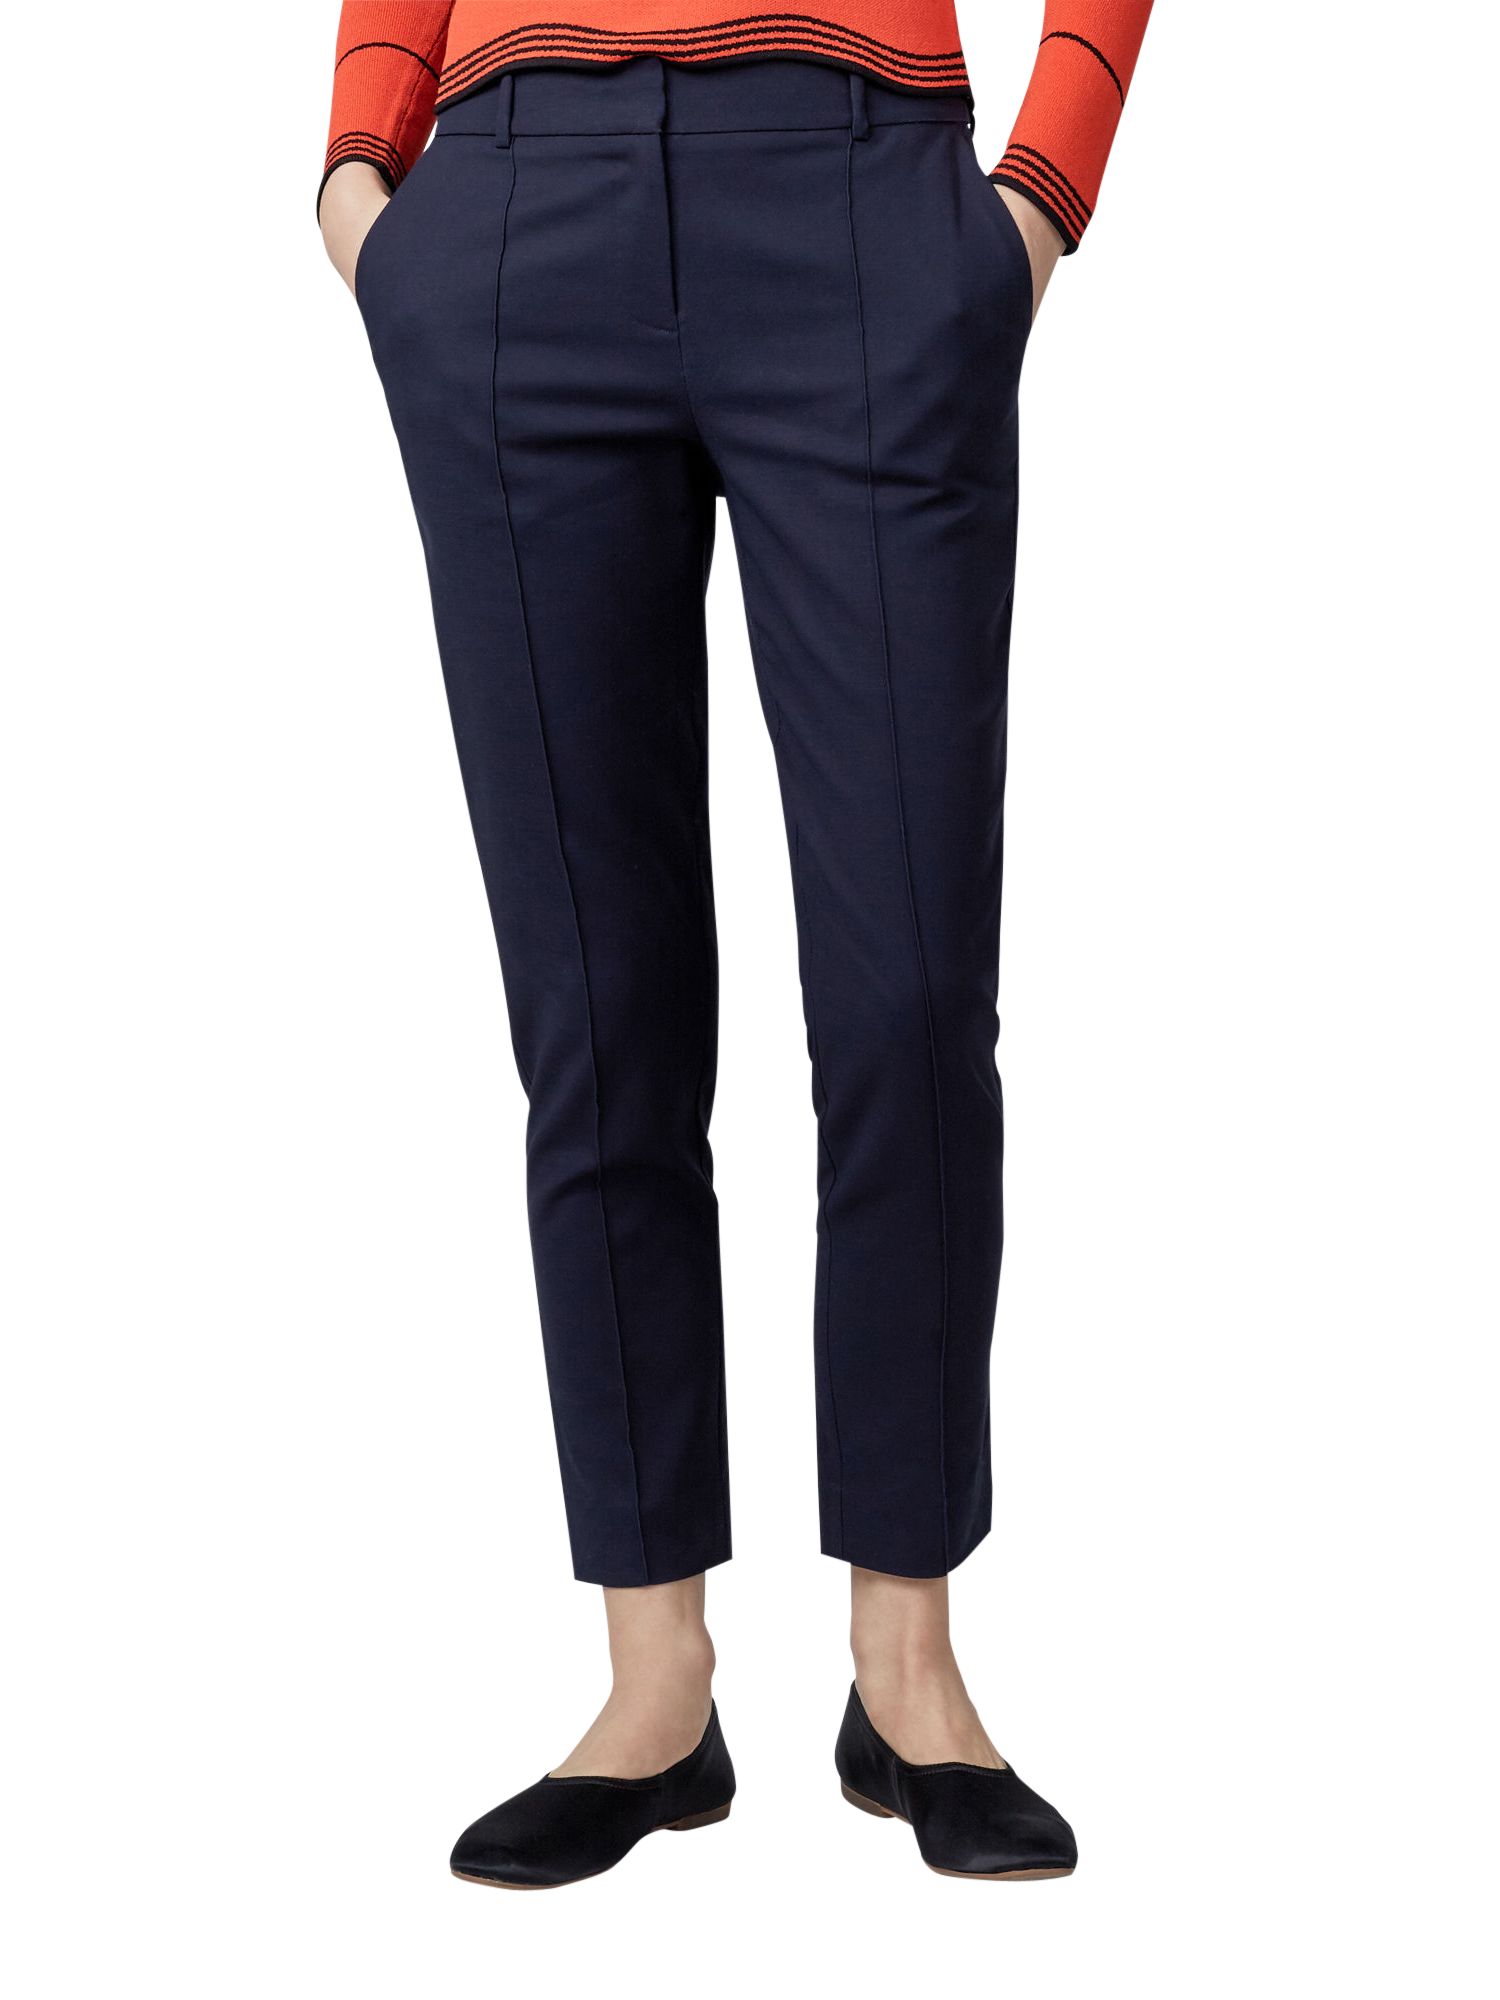 Warehouse Compact Cotton Trousers, Navy, 12